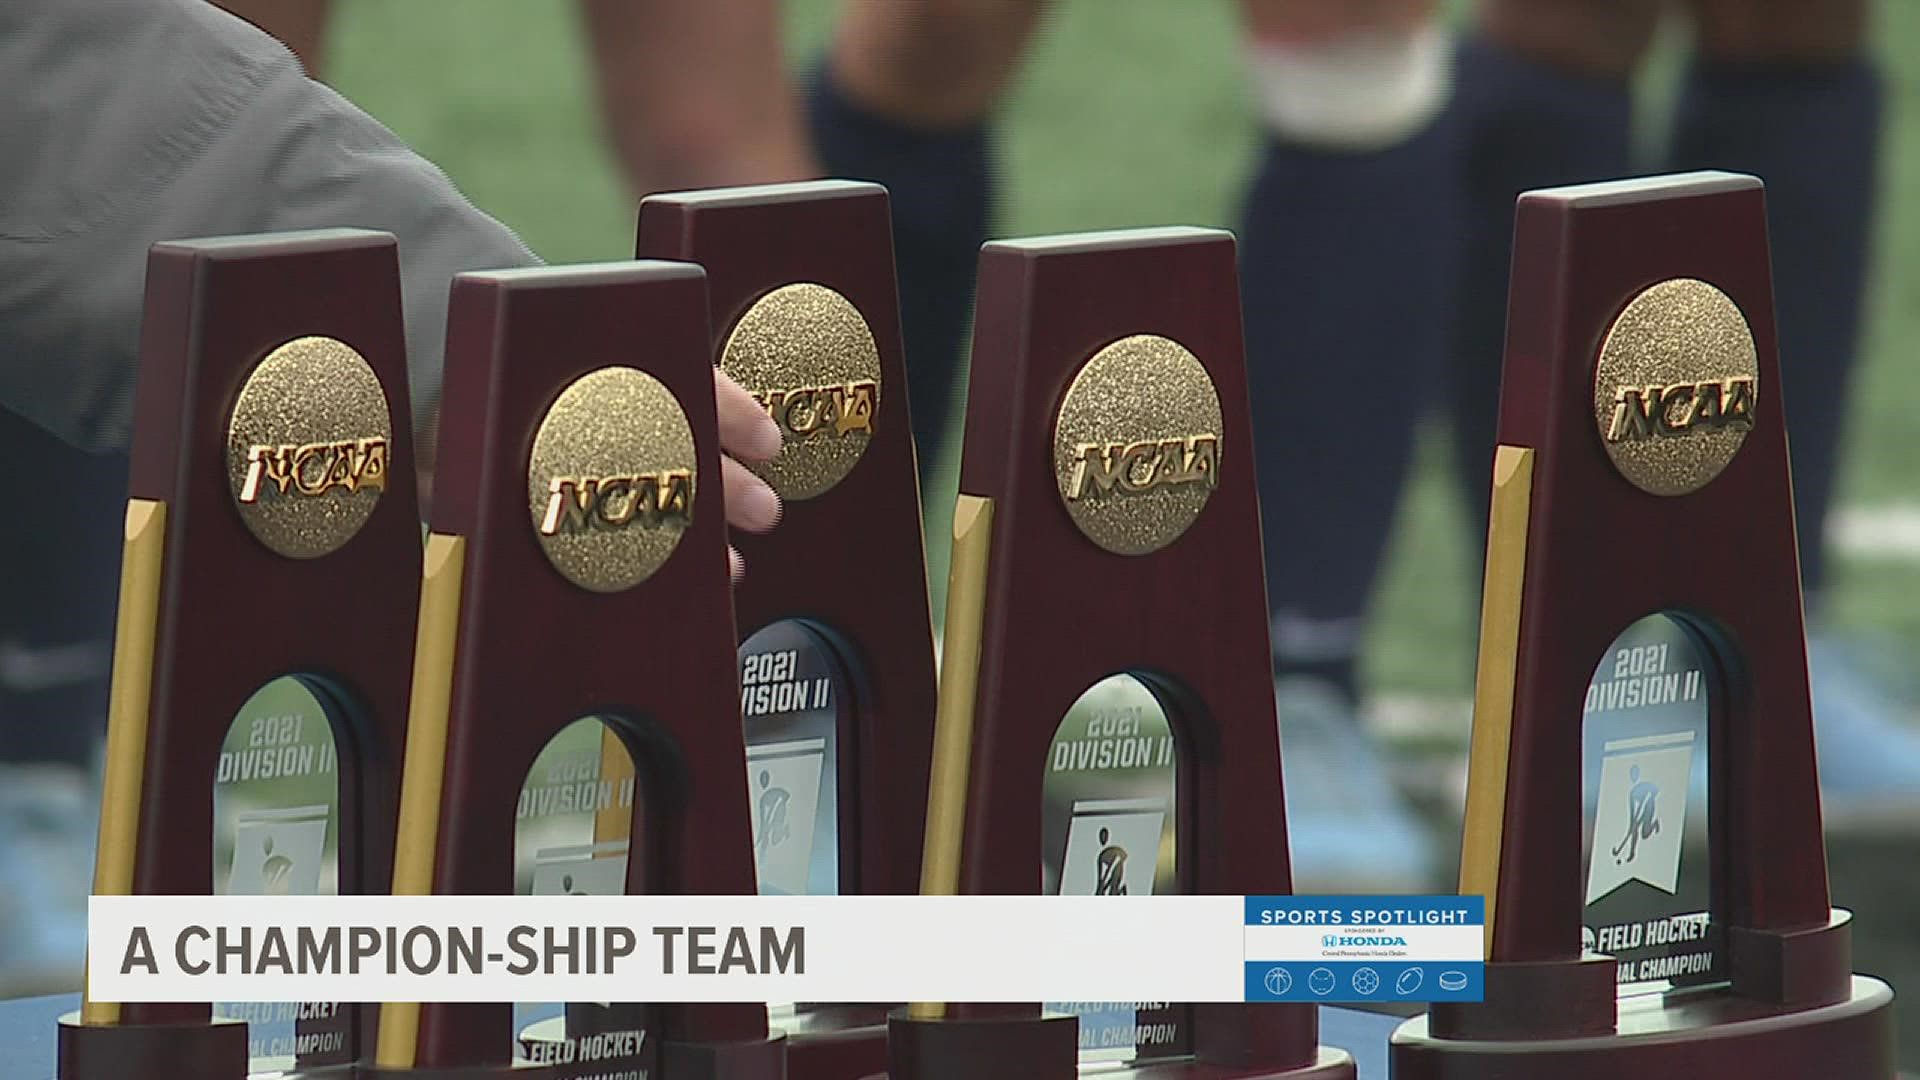 Shippensburg field hockey is no stranger to the spotlight after claiming their fifth NCAA Division II National Championship.